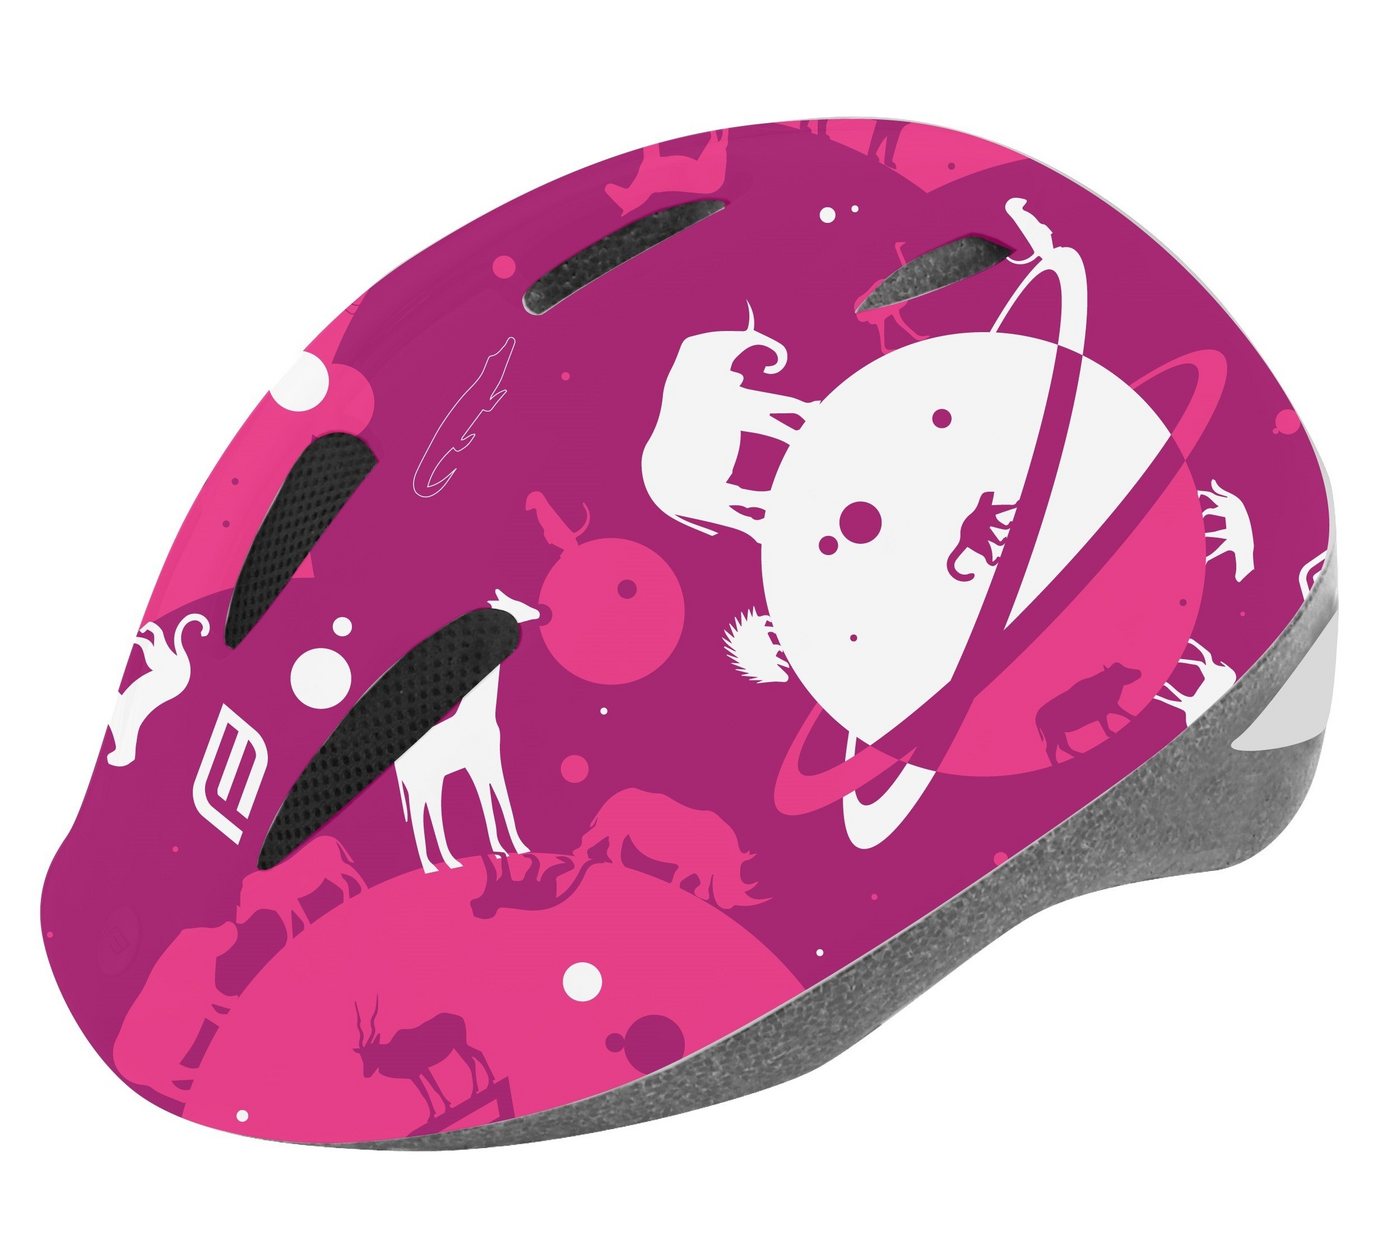 FORCE Fahrradhelm Helm FORCE FUN PLANETS child pink-weiss M von FORCE